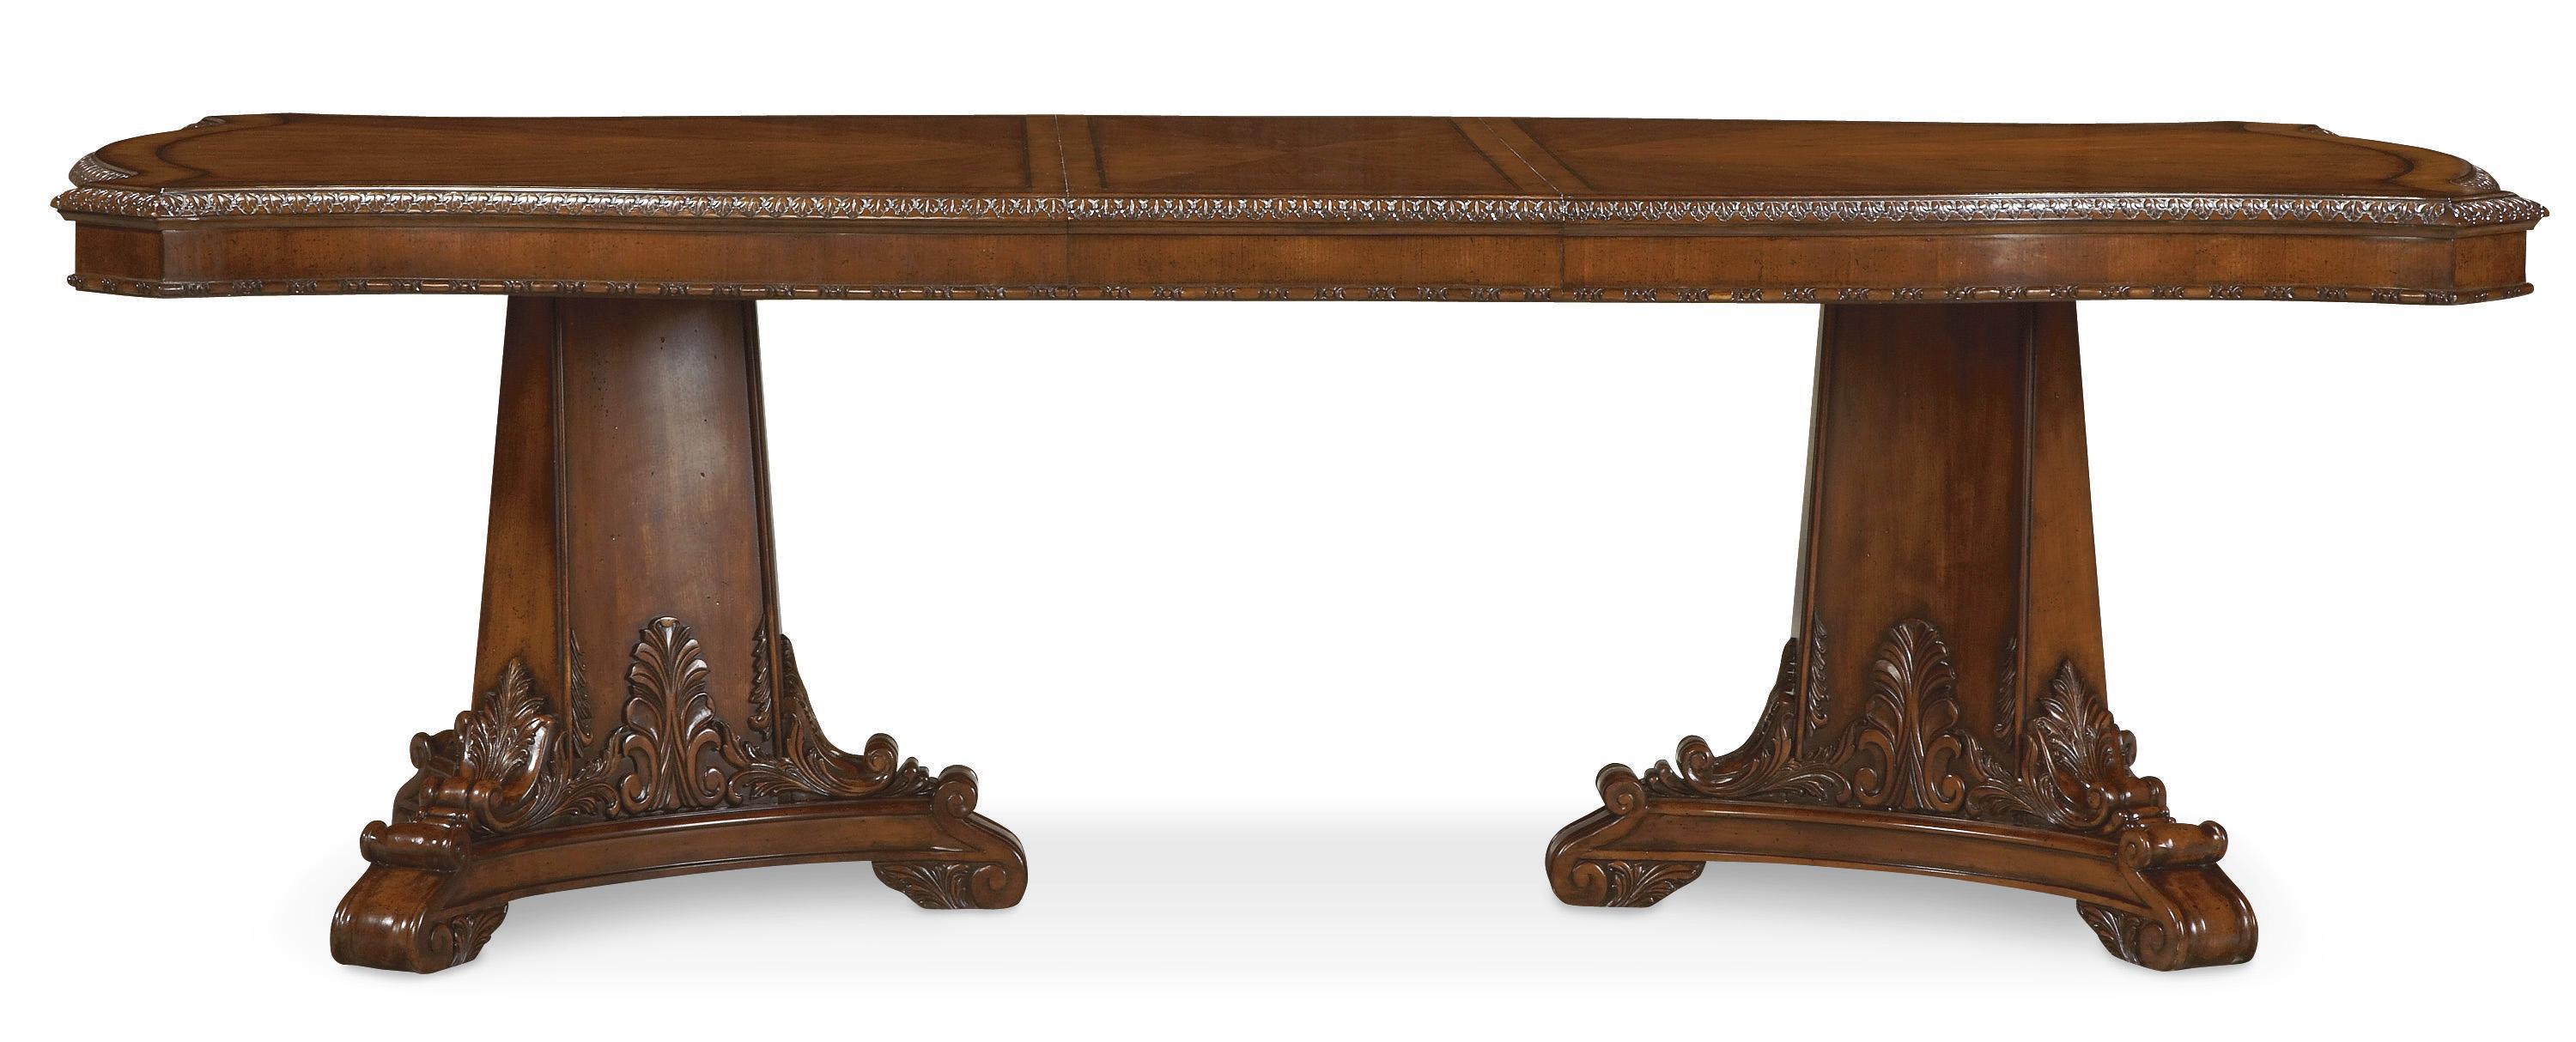 Classic, Traditional Pedestal Table Old World 143221-2606 in Cherry, Brown Lacquer